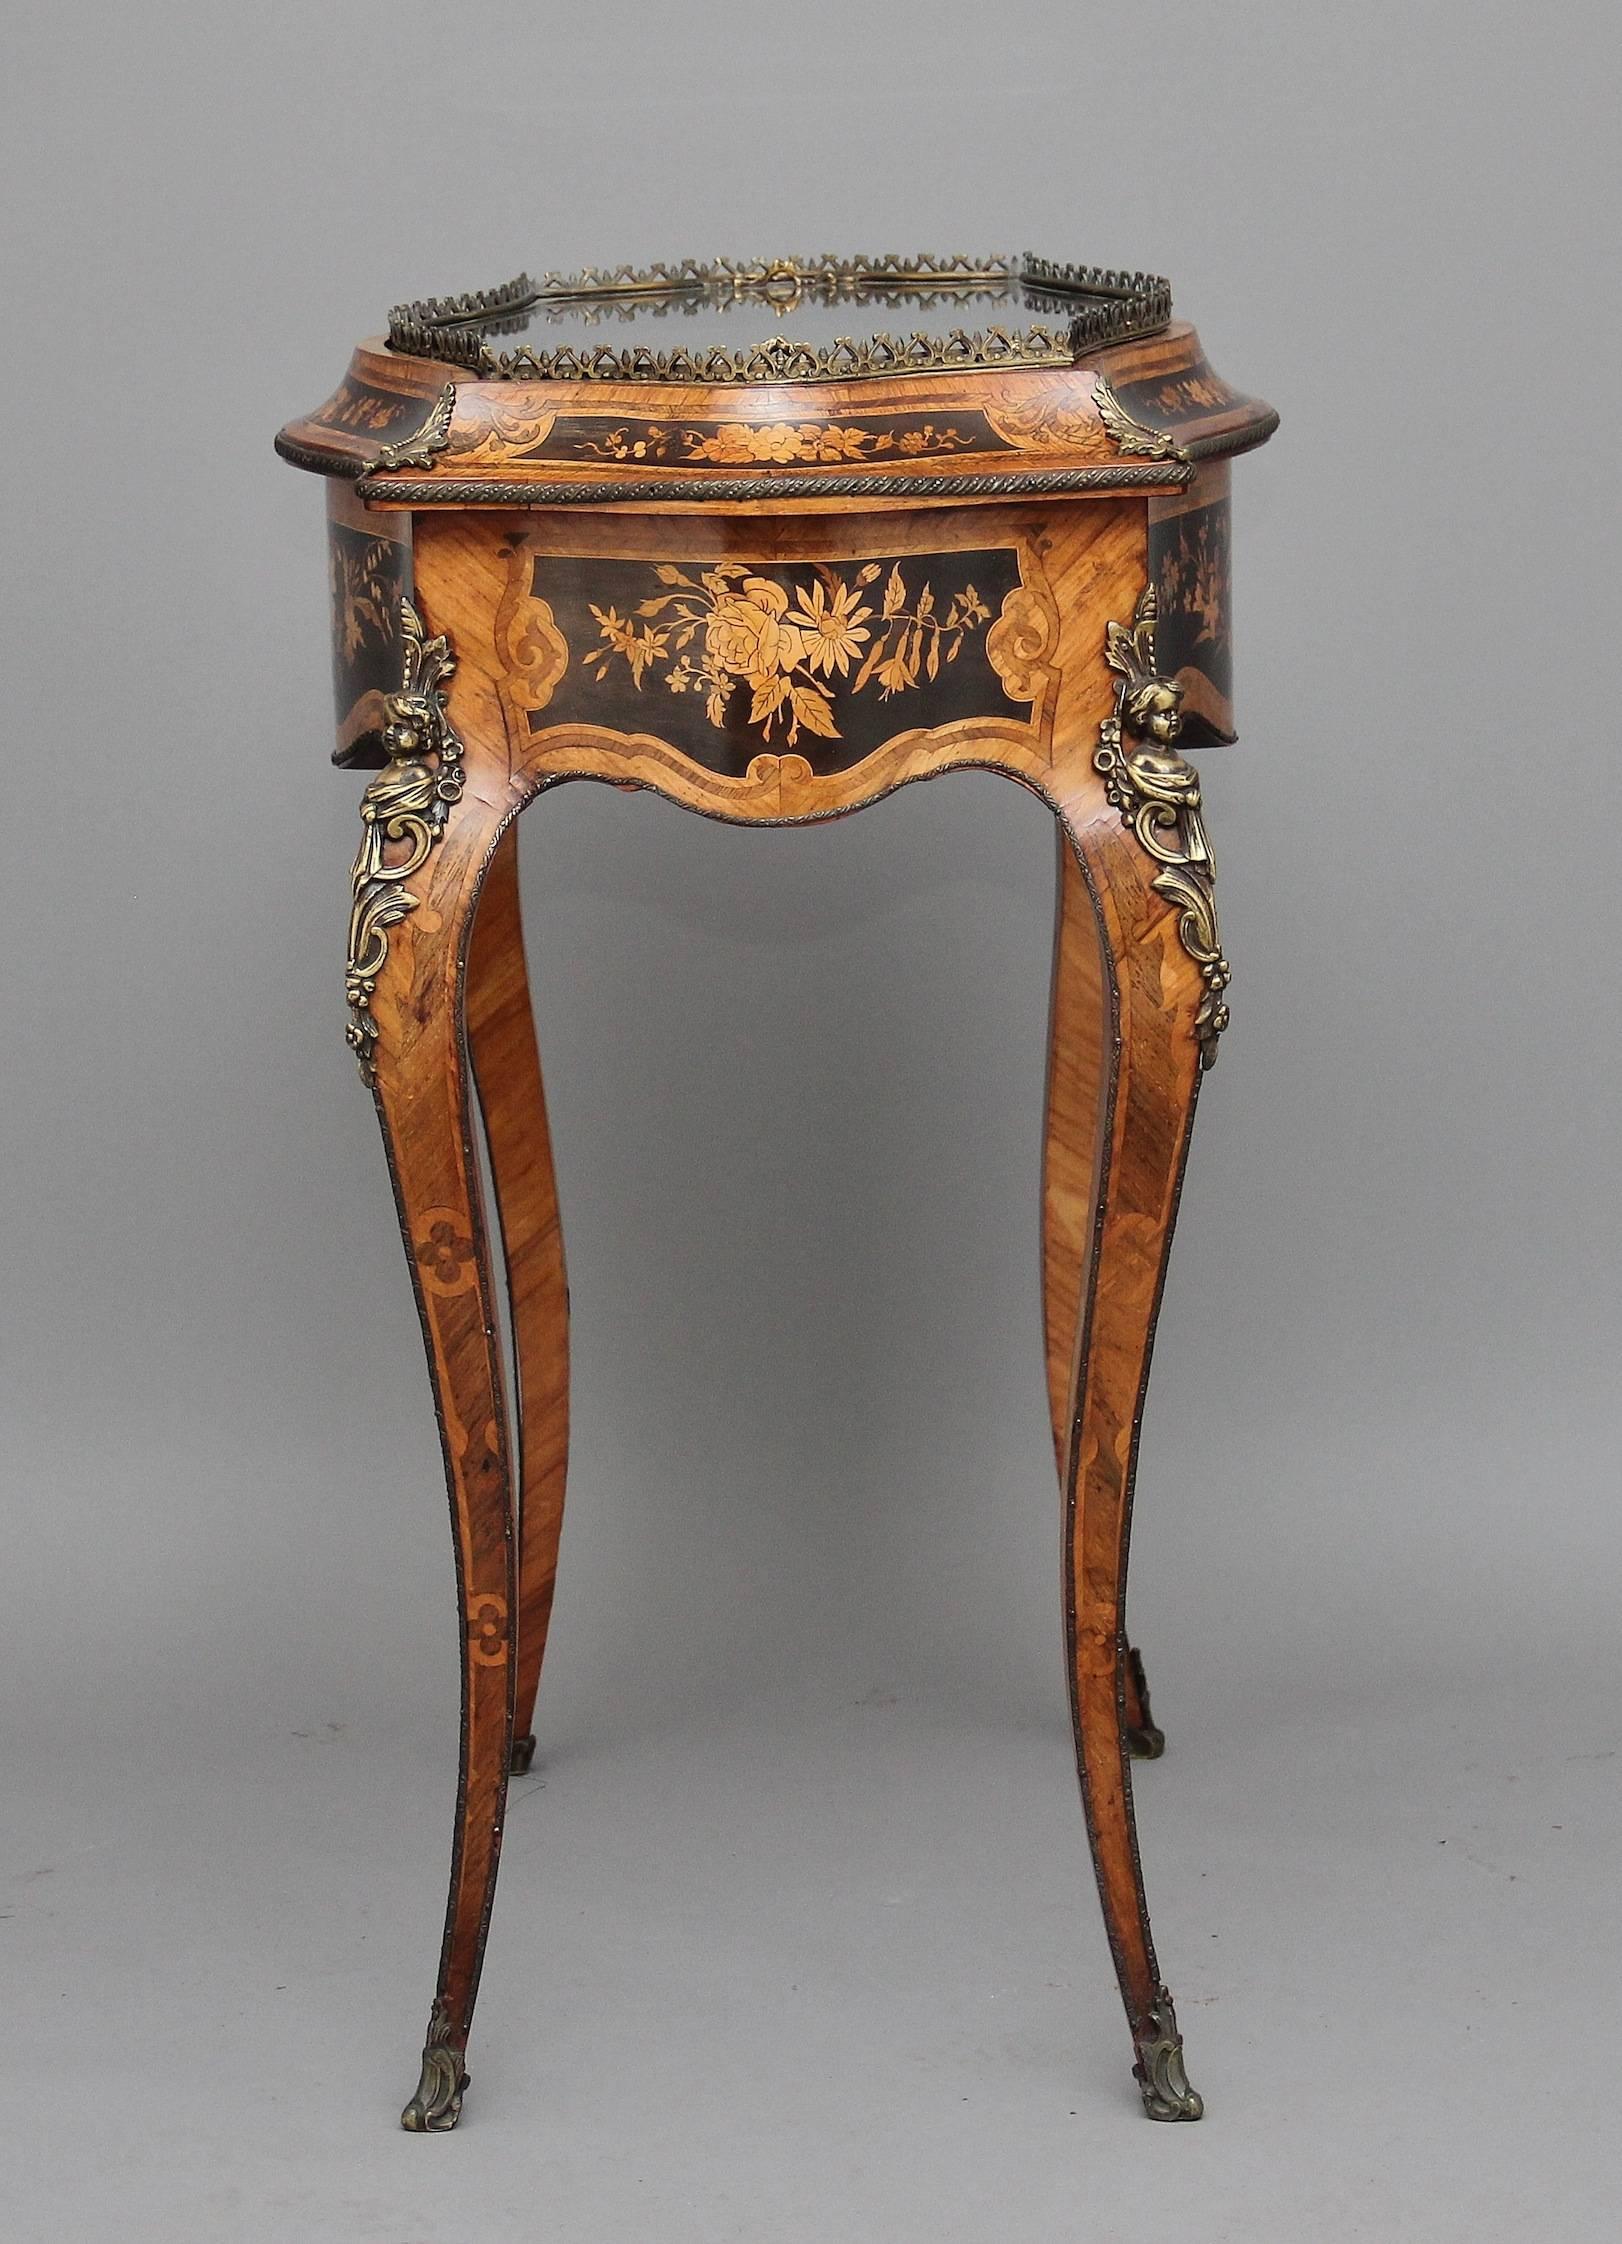 Victorian 19th Century French Inlaid Kingwood Bijouterie Table